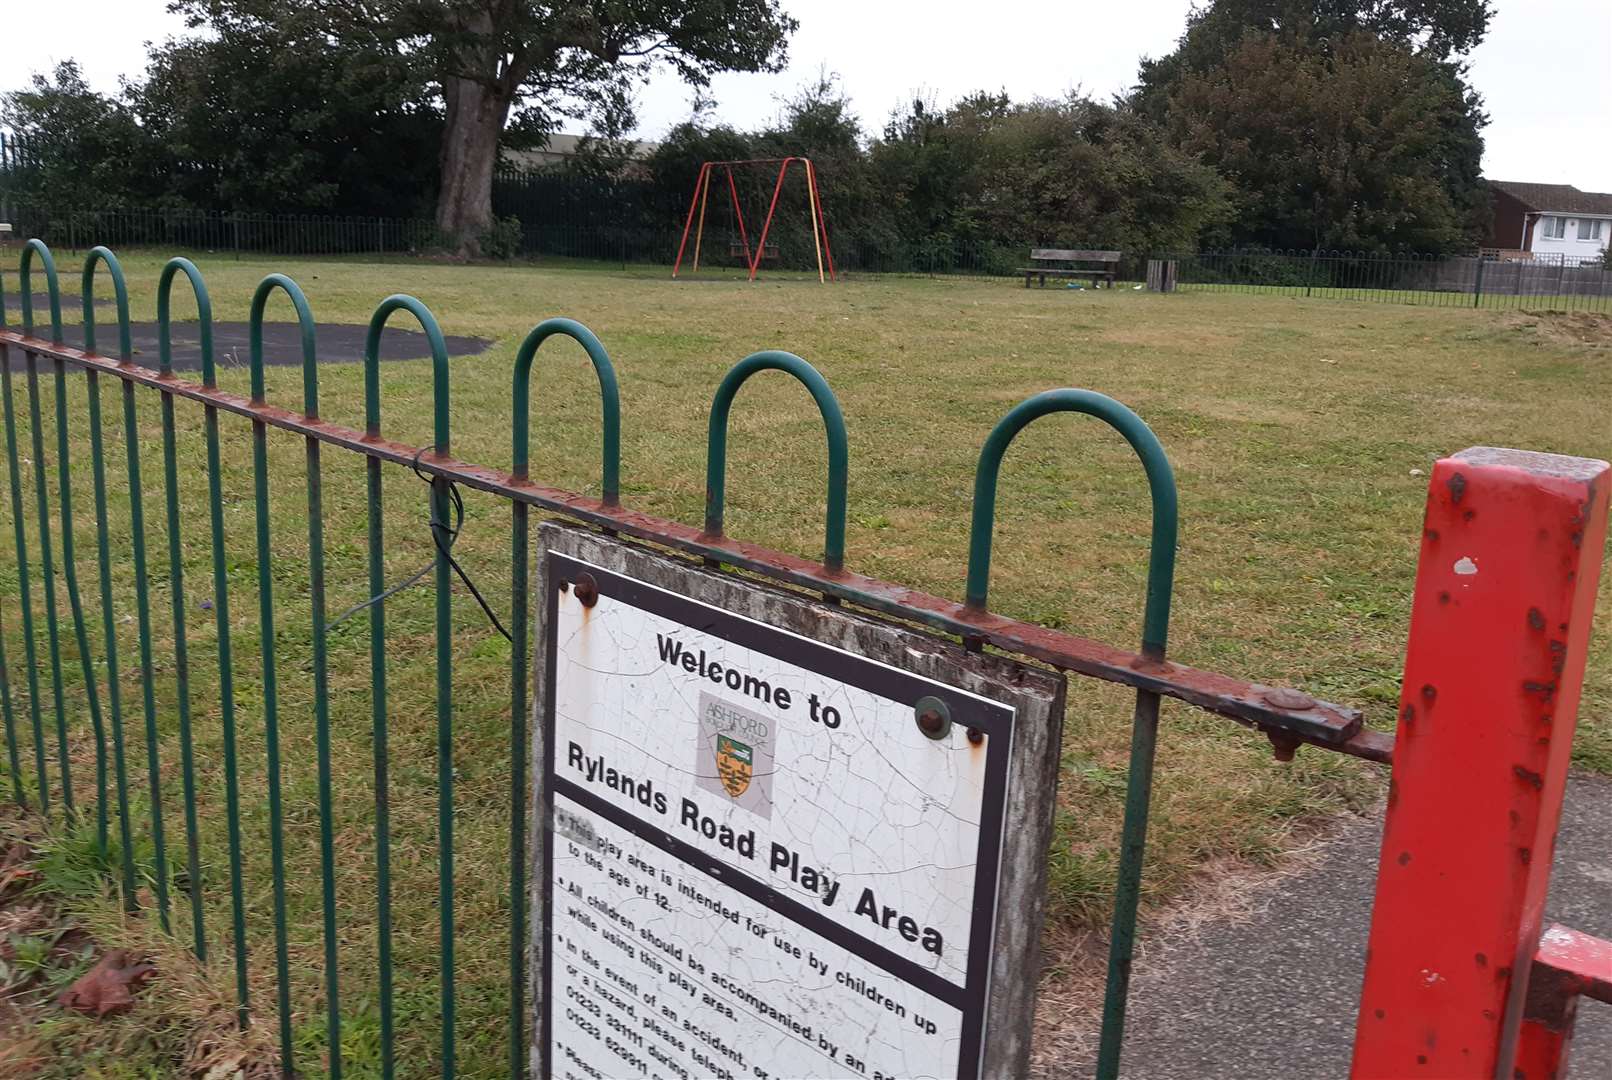 The Rylands Road play area is one of three in Ashford which will receive the funding boost